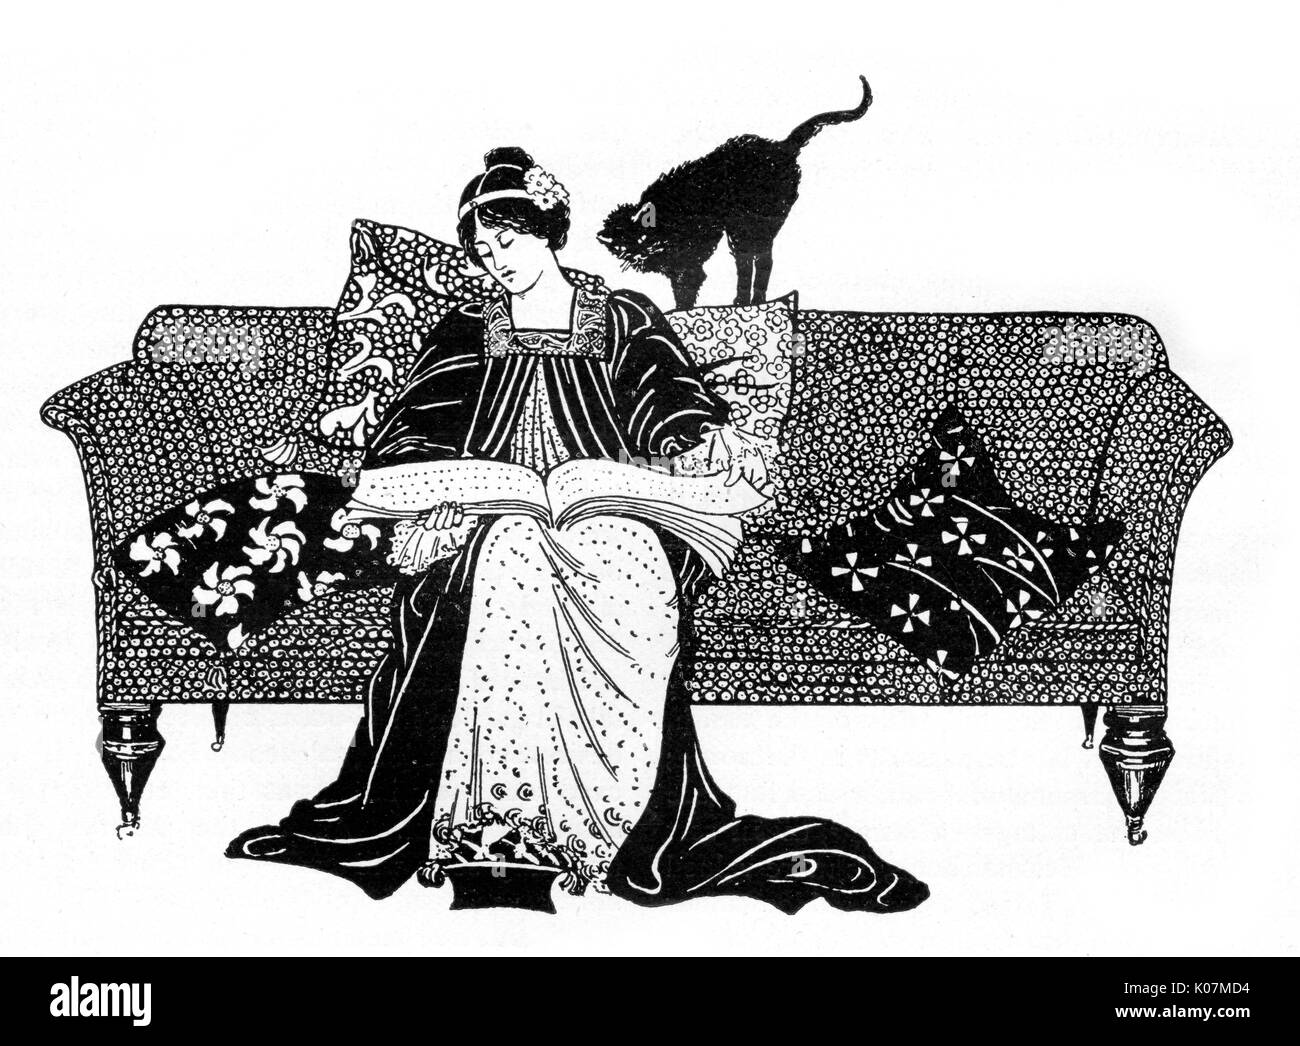 A woman in aesthetic dress sits on a sofa reading while her cat looks over her shoulder.     Date: 1904 Stock Photo